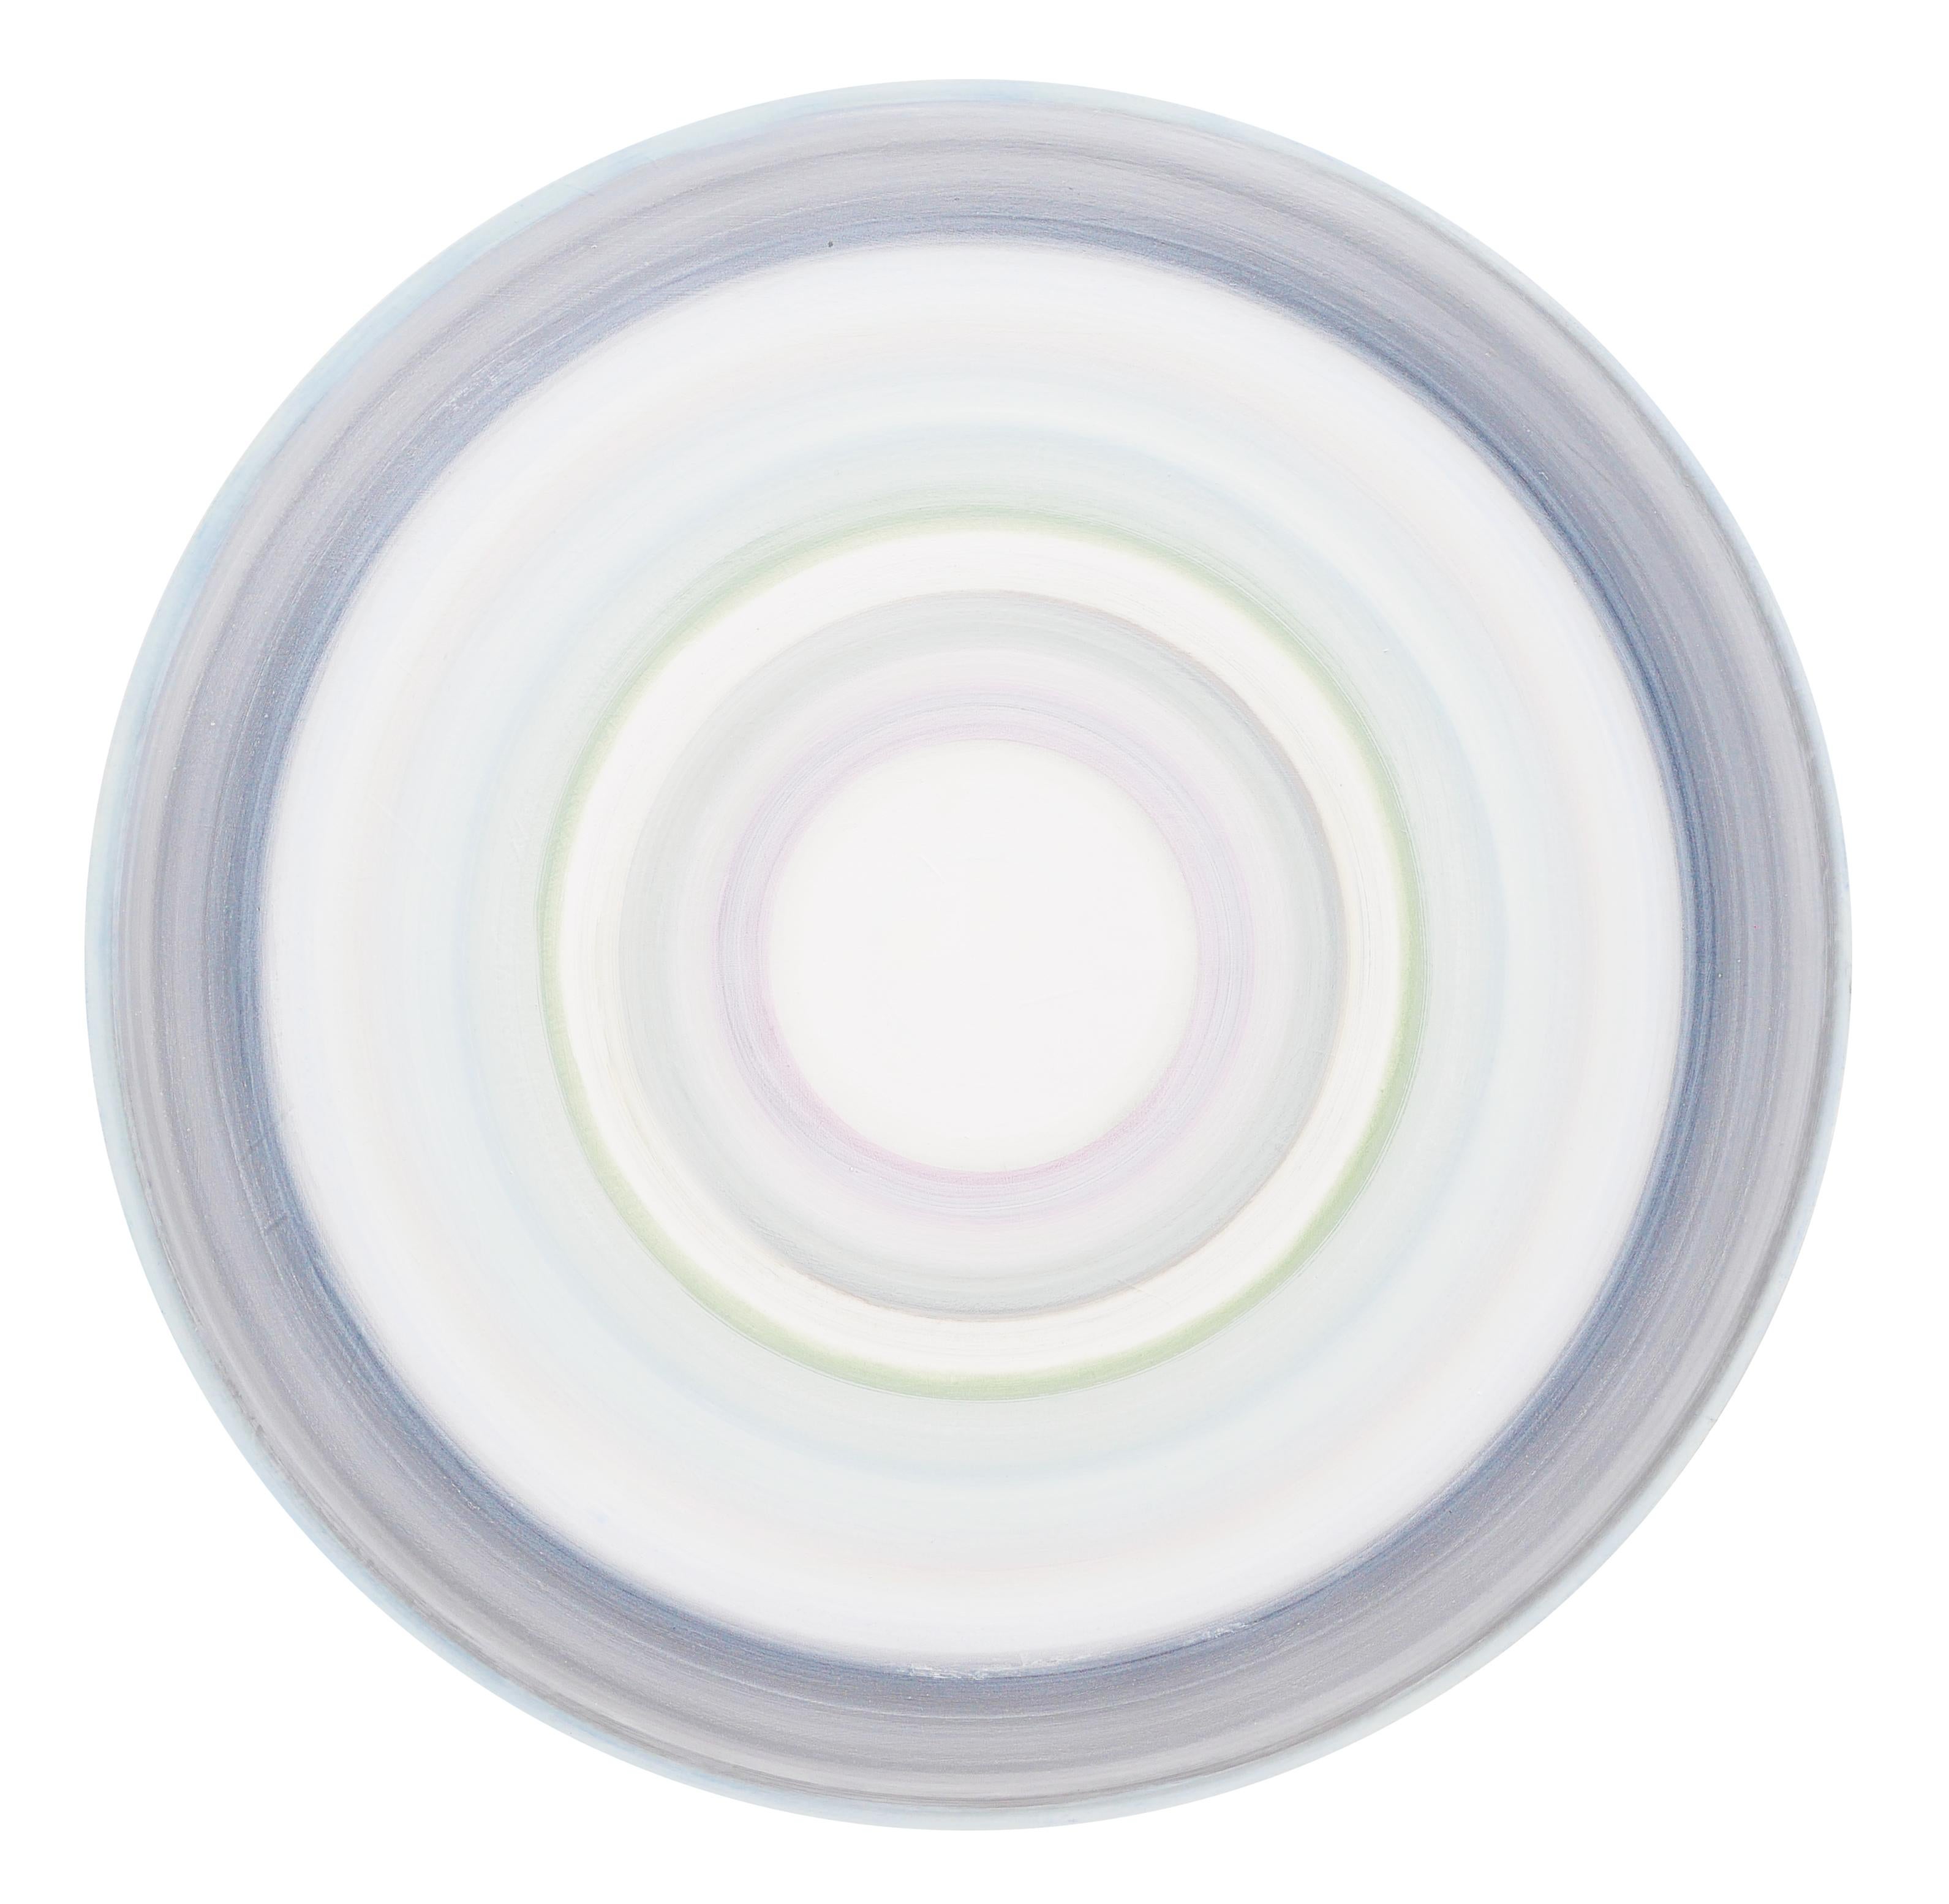 Pastel-toned abstract contemporary circular painting by Houston, TX artist, David Hardaker. This painting features various rings of pastel green, blue, and purple. Signed and titled by the artist at the back. Unframed but framing options are